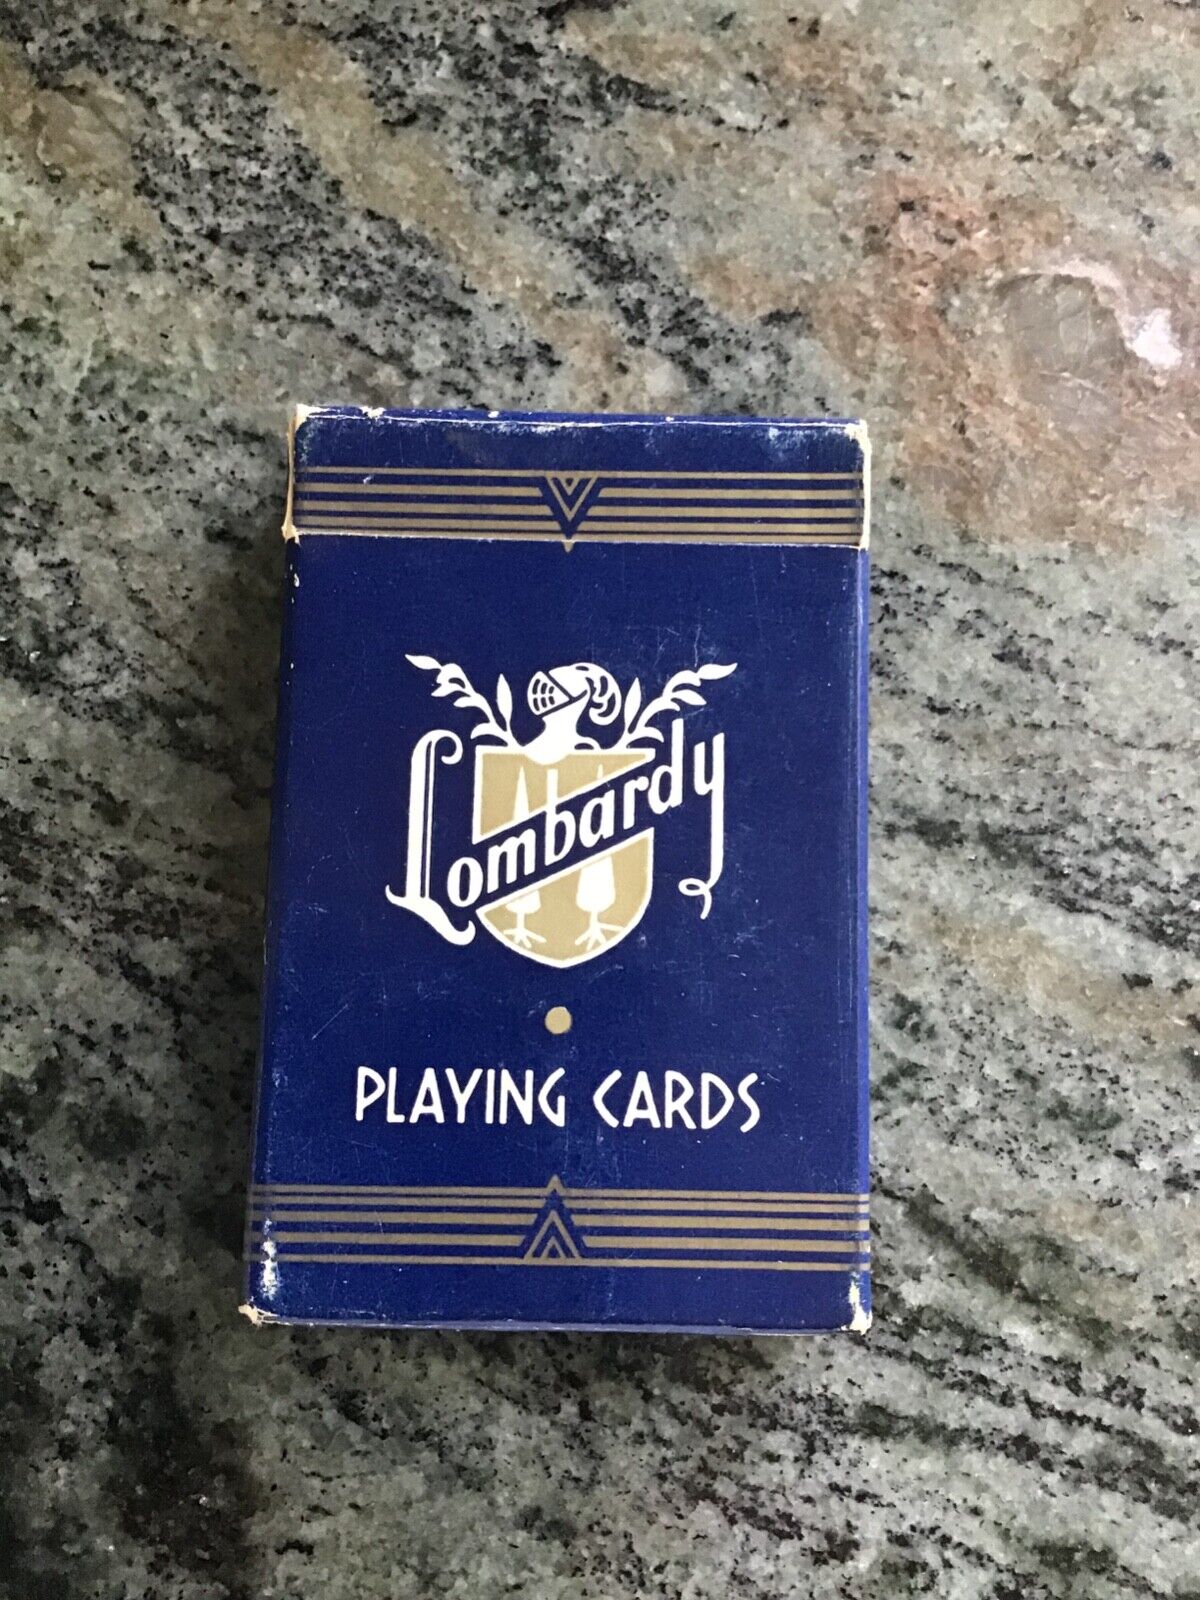 Vintage Lombardy Playing Cards All 52 Cards in good condition 2 Jokers